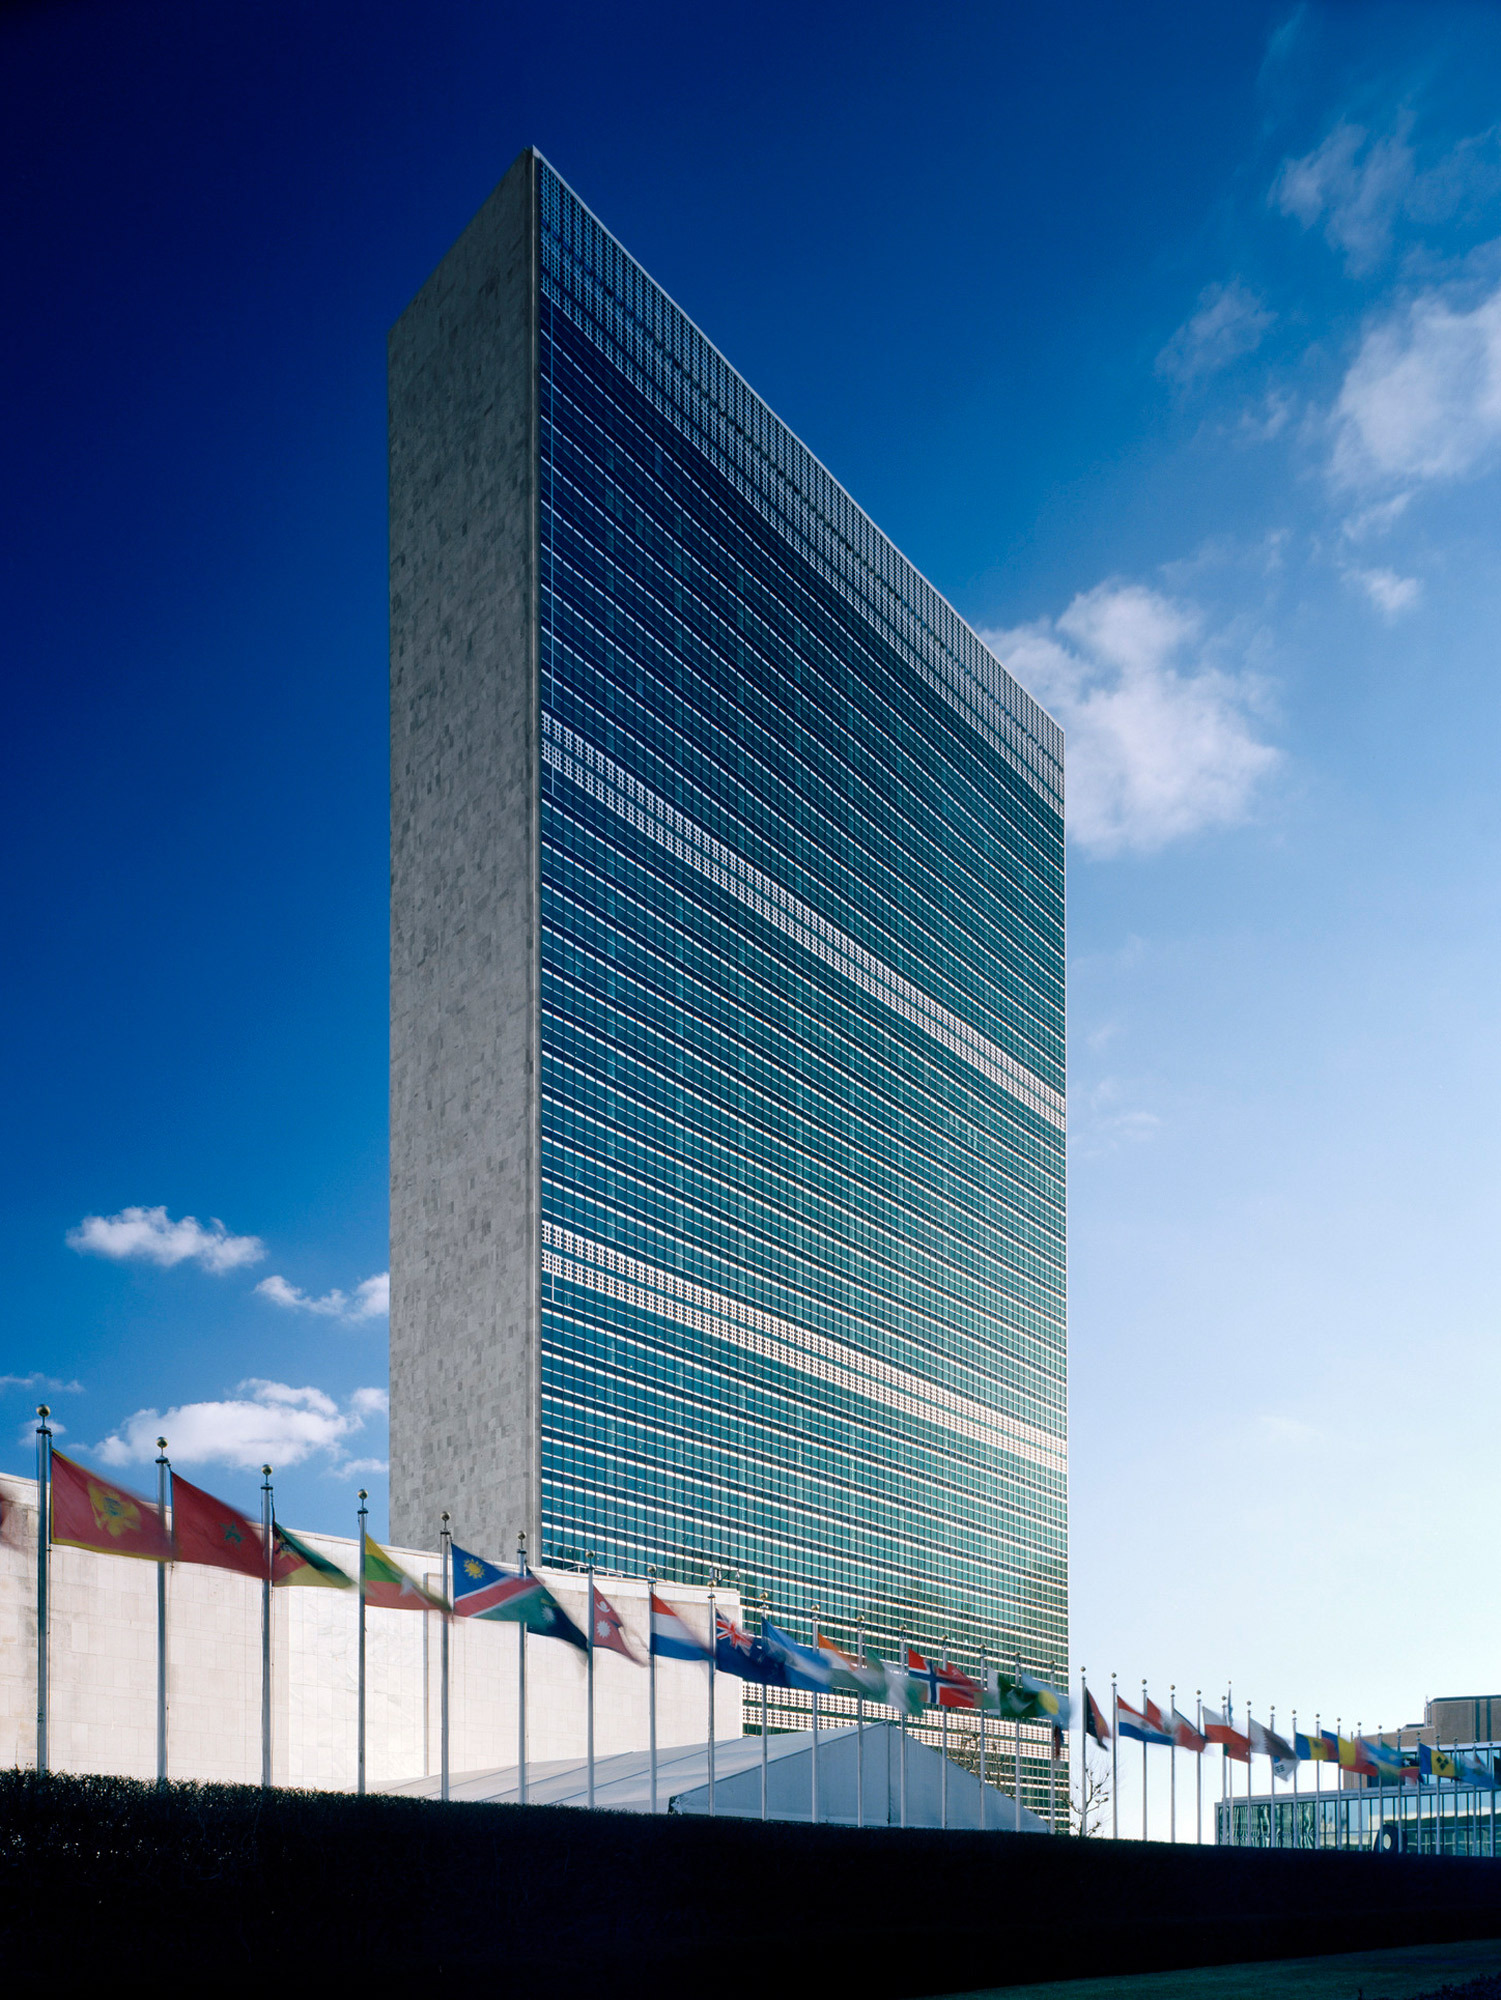 The United Nations Headquarters building stands tall against a clear blue sky, featuring a distinctive grid of windows on its façade, with a row of international flags fluttering in the foreground.